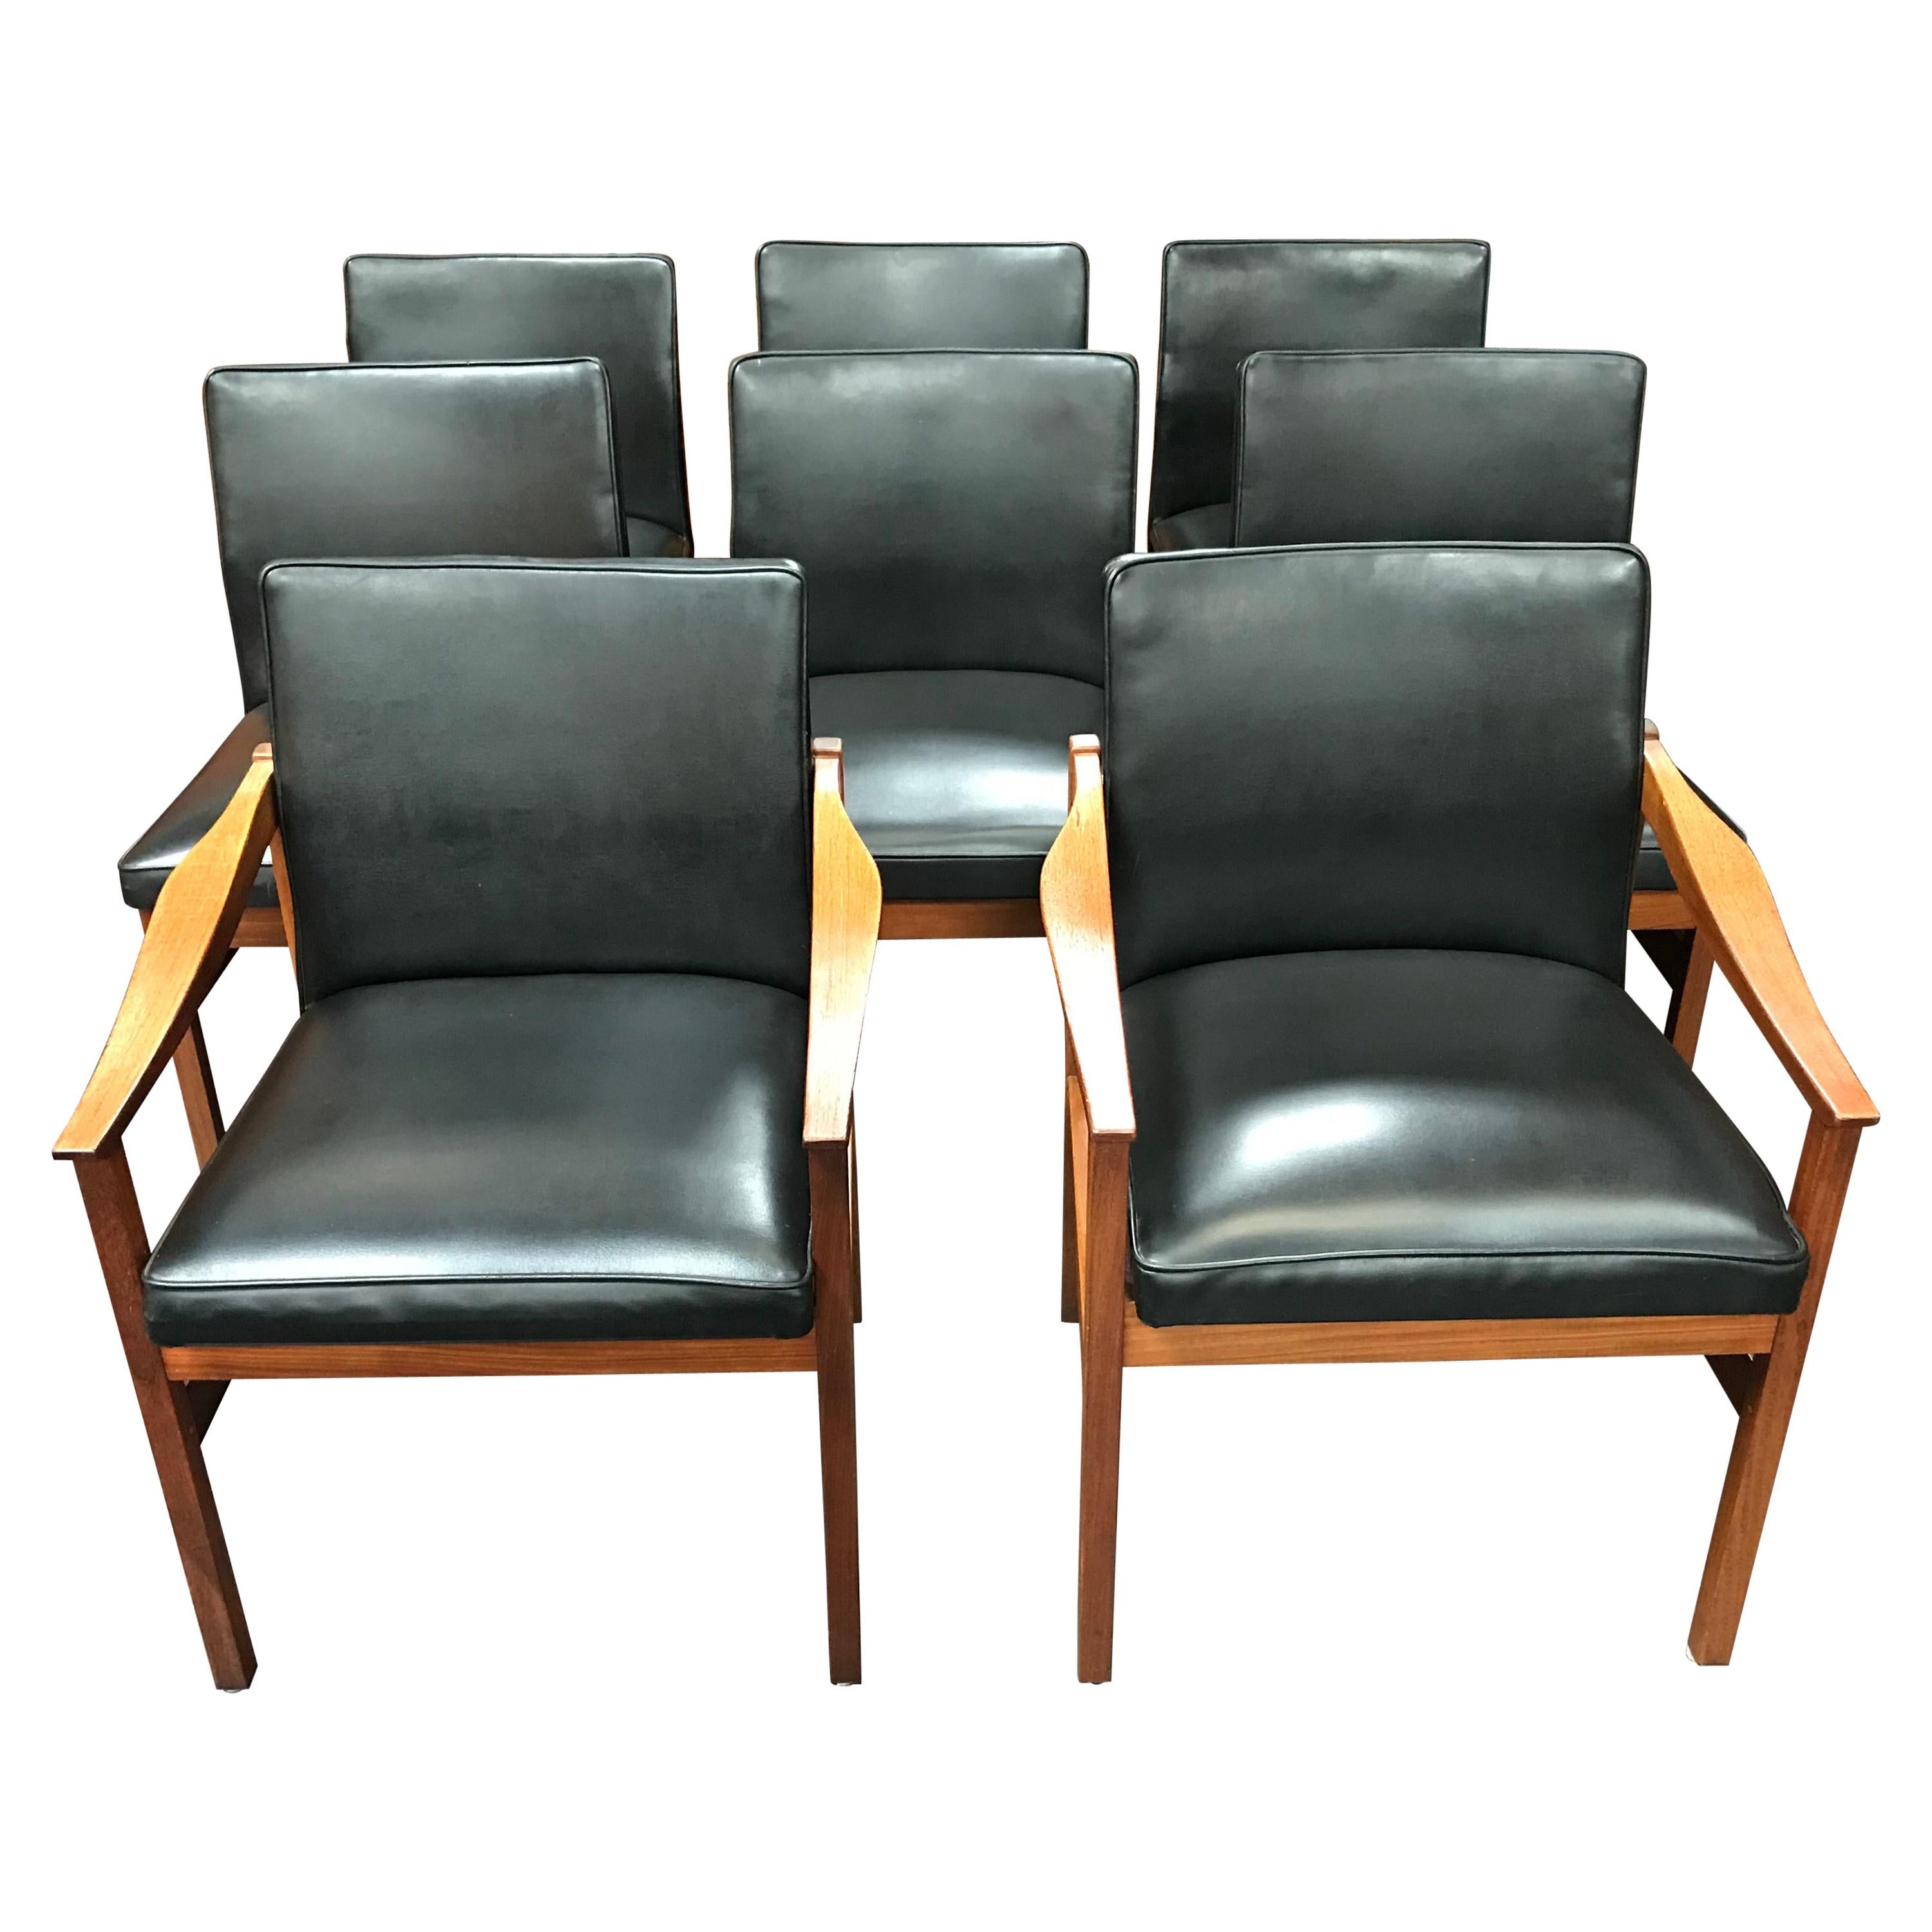 Swedish Midcentury Dining Chairs in Teak by Nils Jonsson for Troeds, Set of 8 For Sale